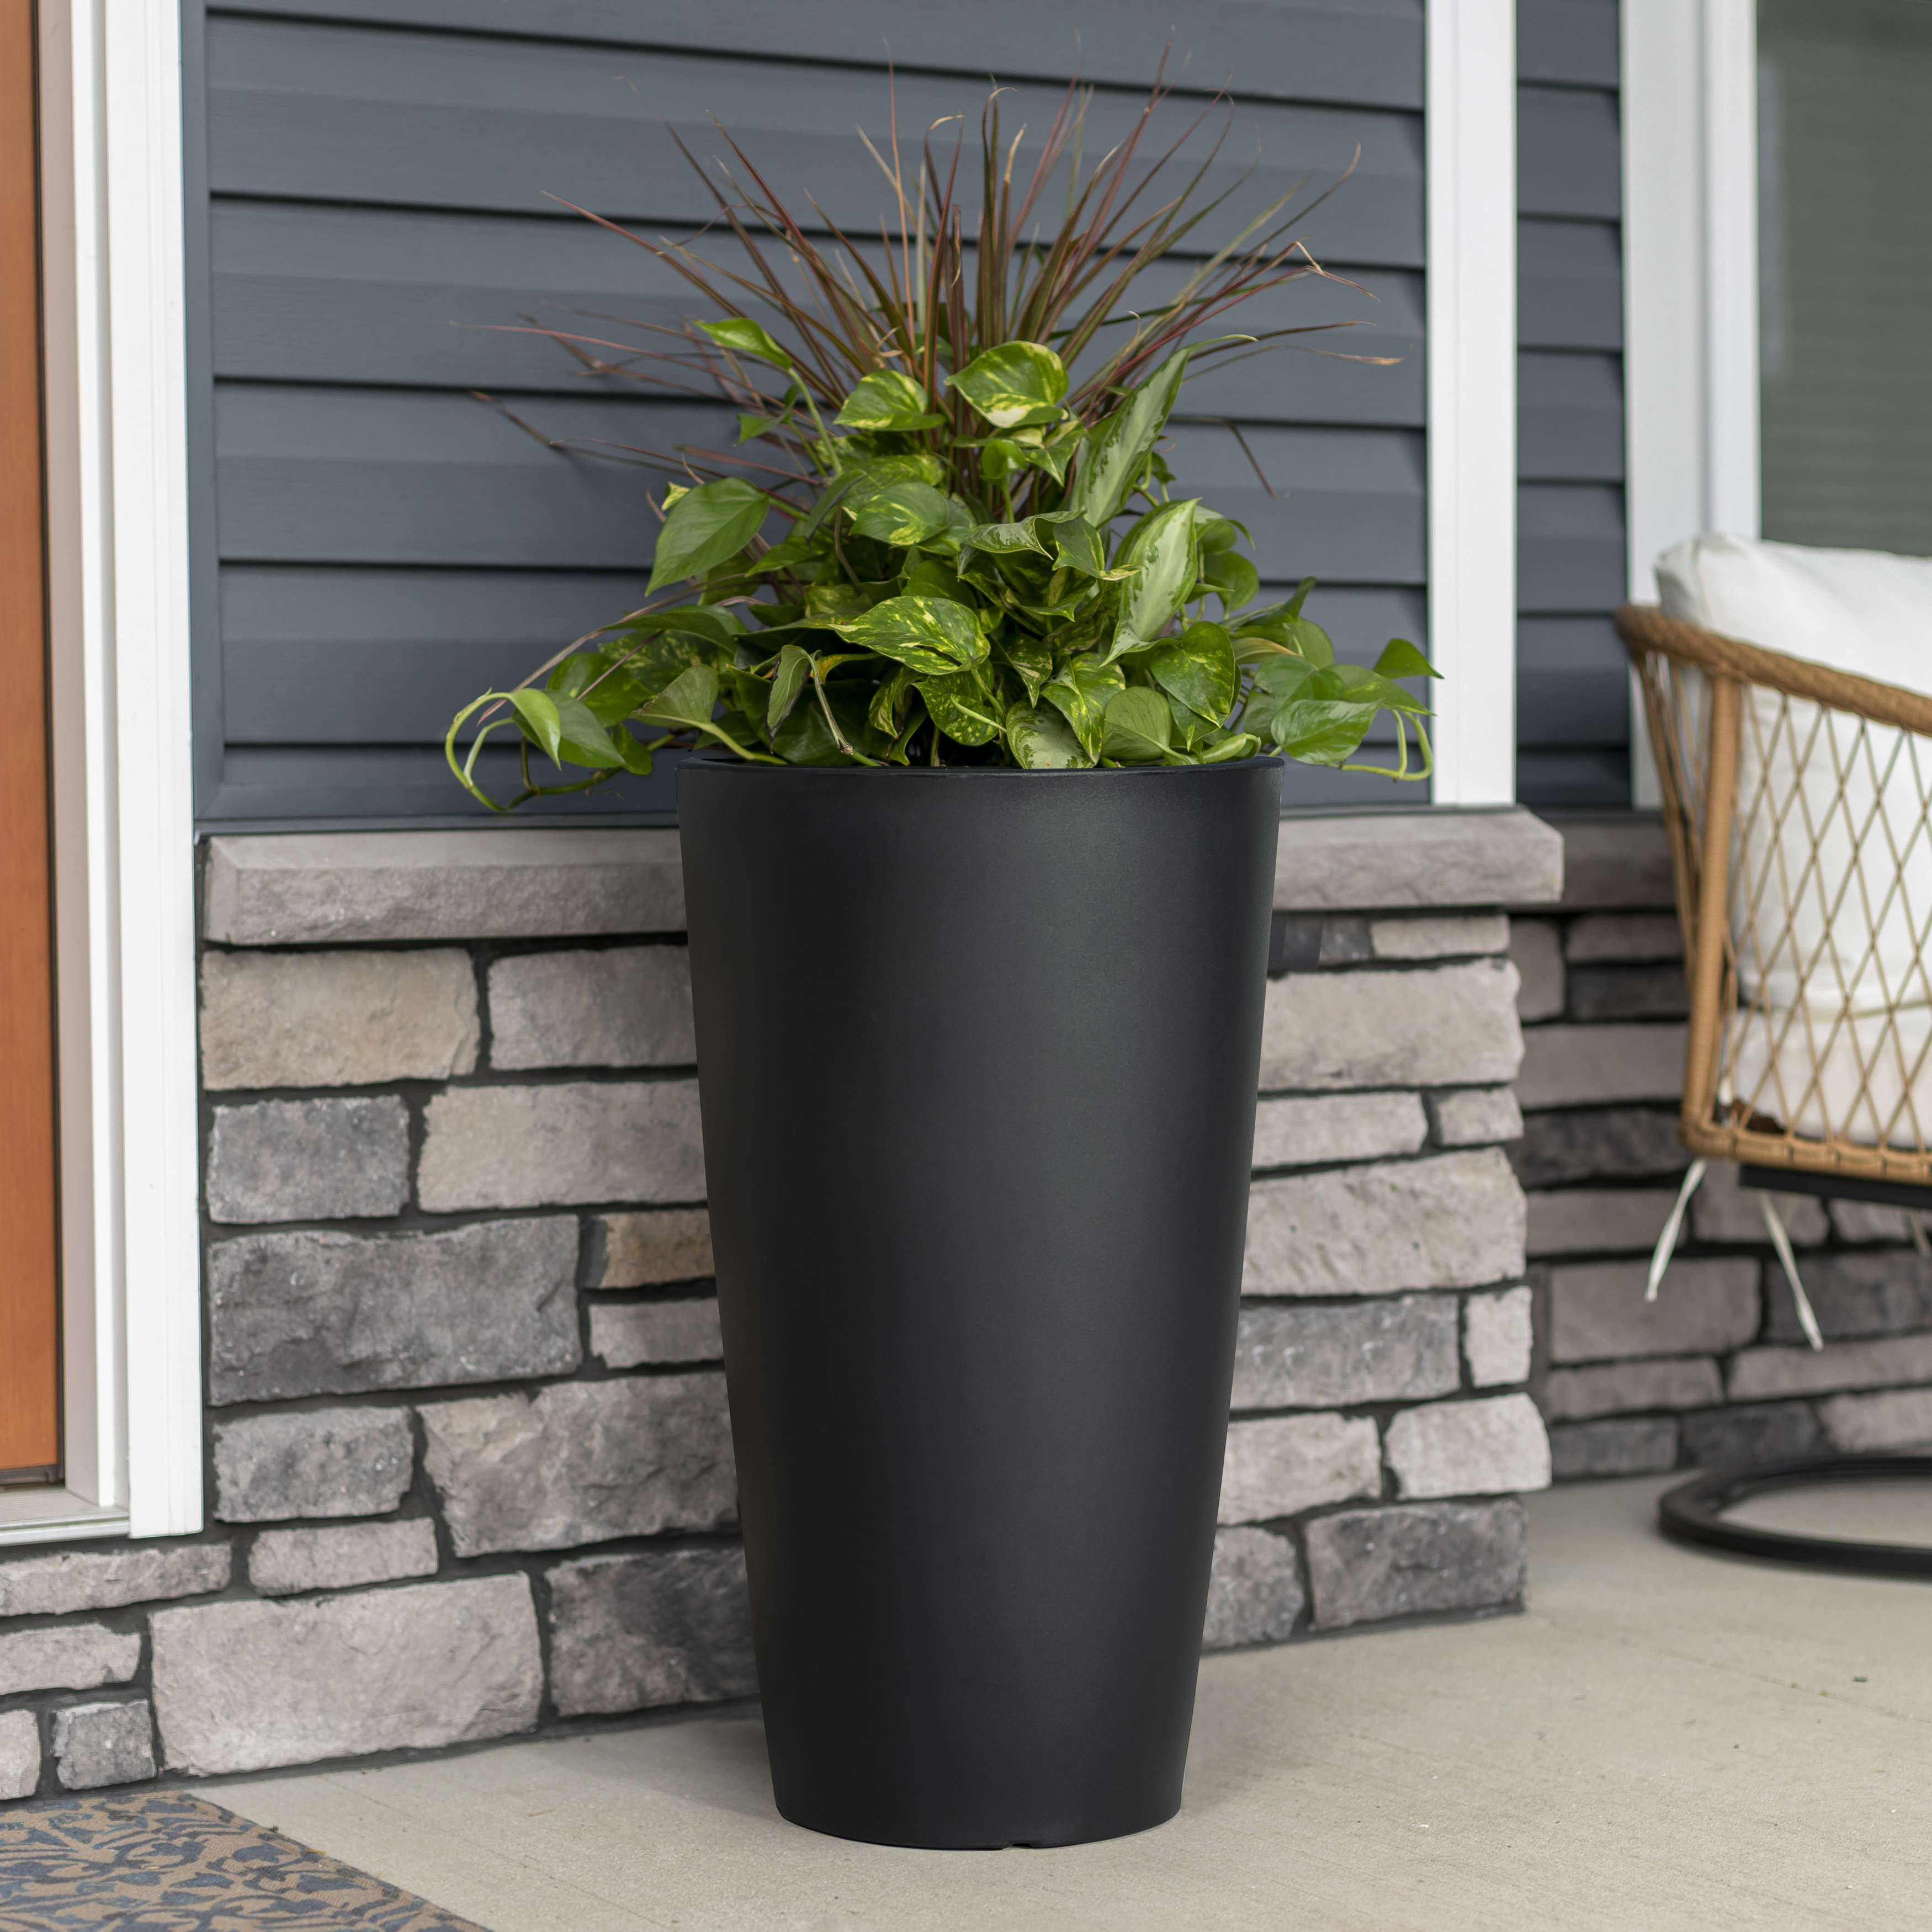 Elevens Tall Planters 27 Inch Tapered Square Planters Garden Flower  Pots,Indoor/Outdoor Planter with Tray, Large Planter for Patio Black-2 Pack